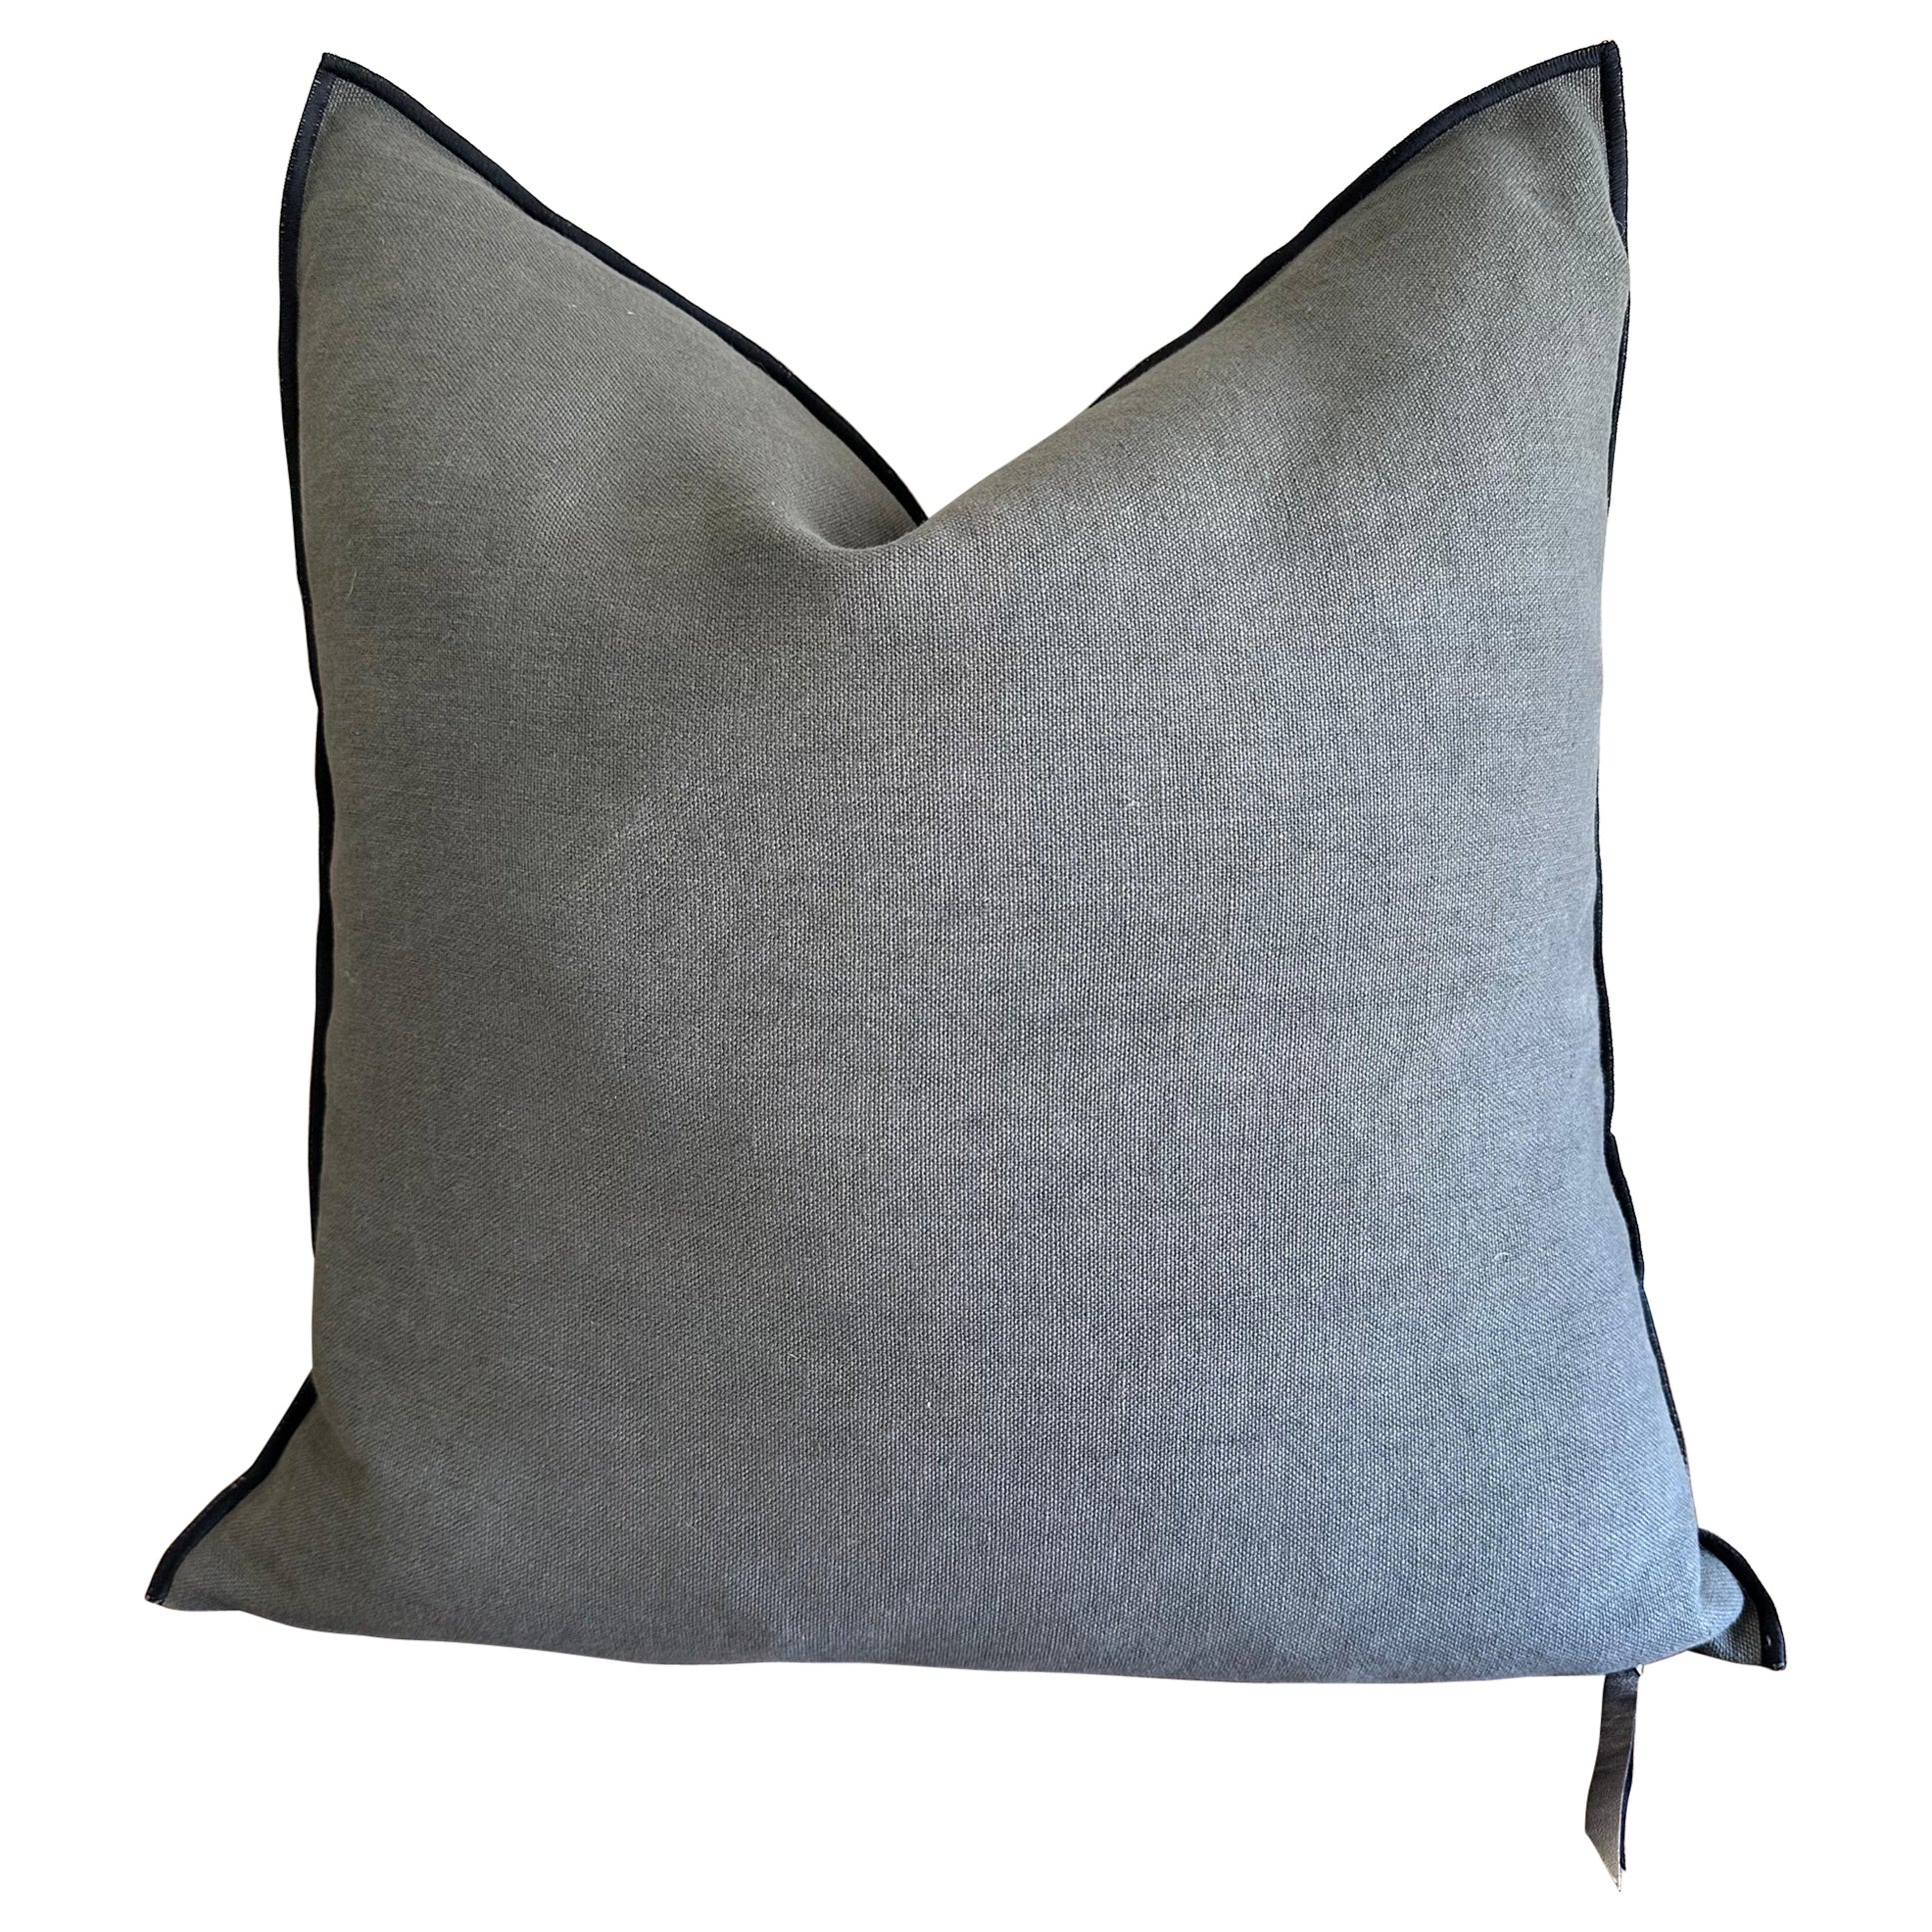 Stone Washed French Linen Accent Pillow in Crocodile For Sale